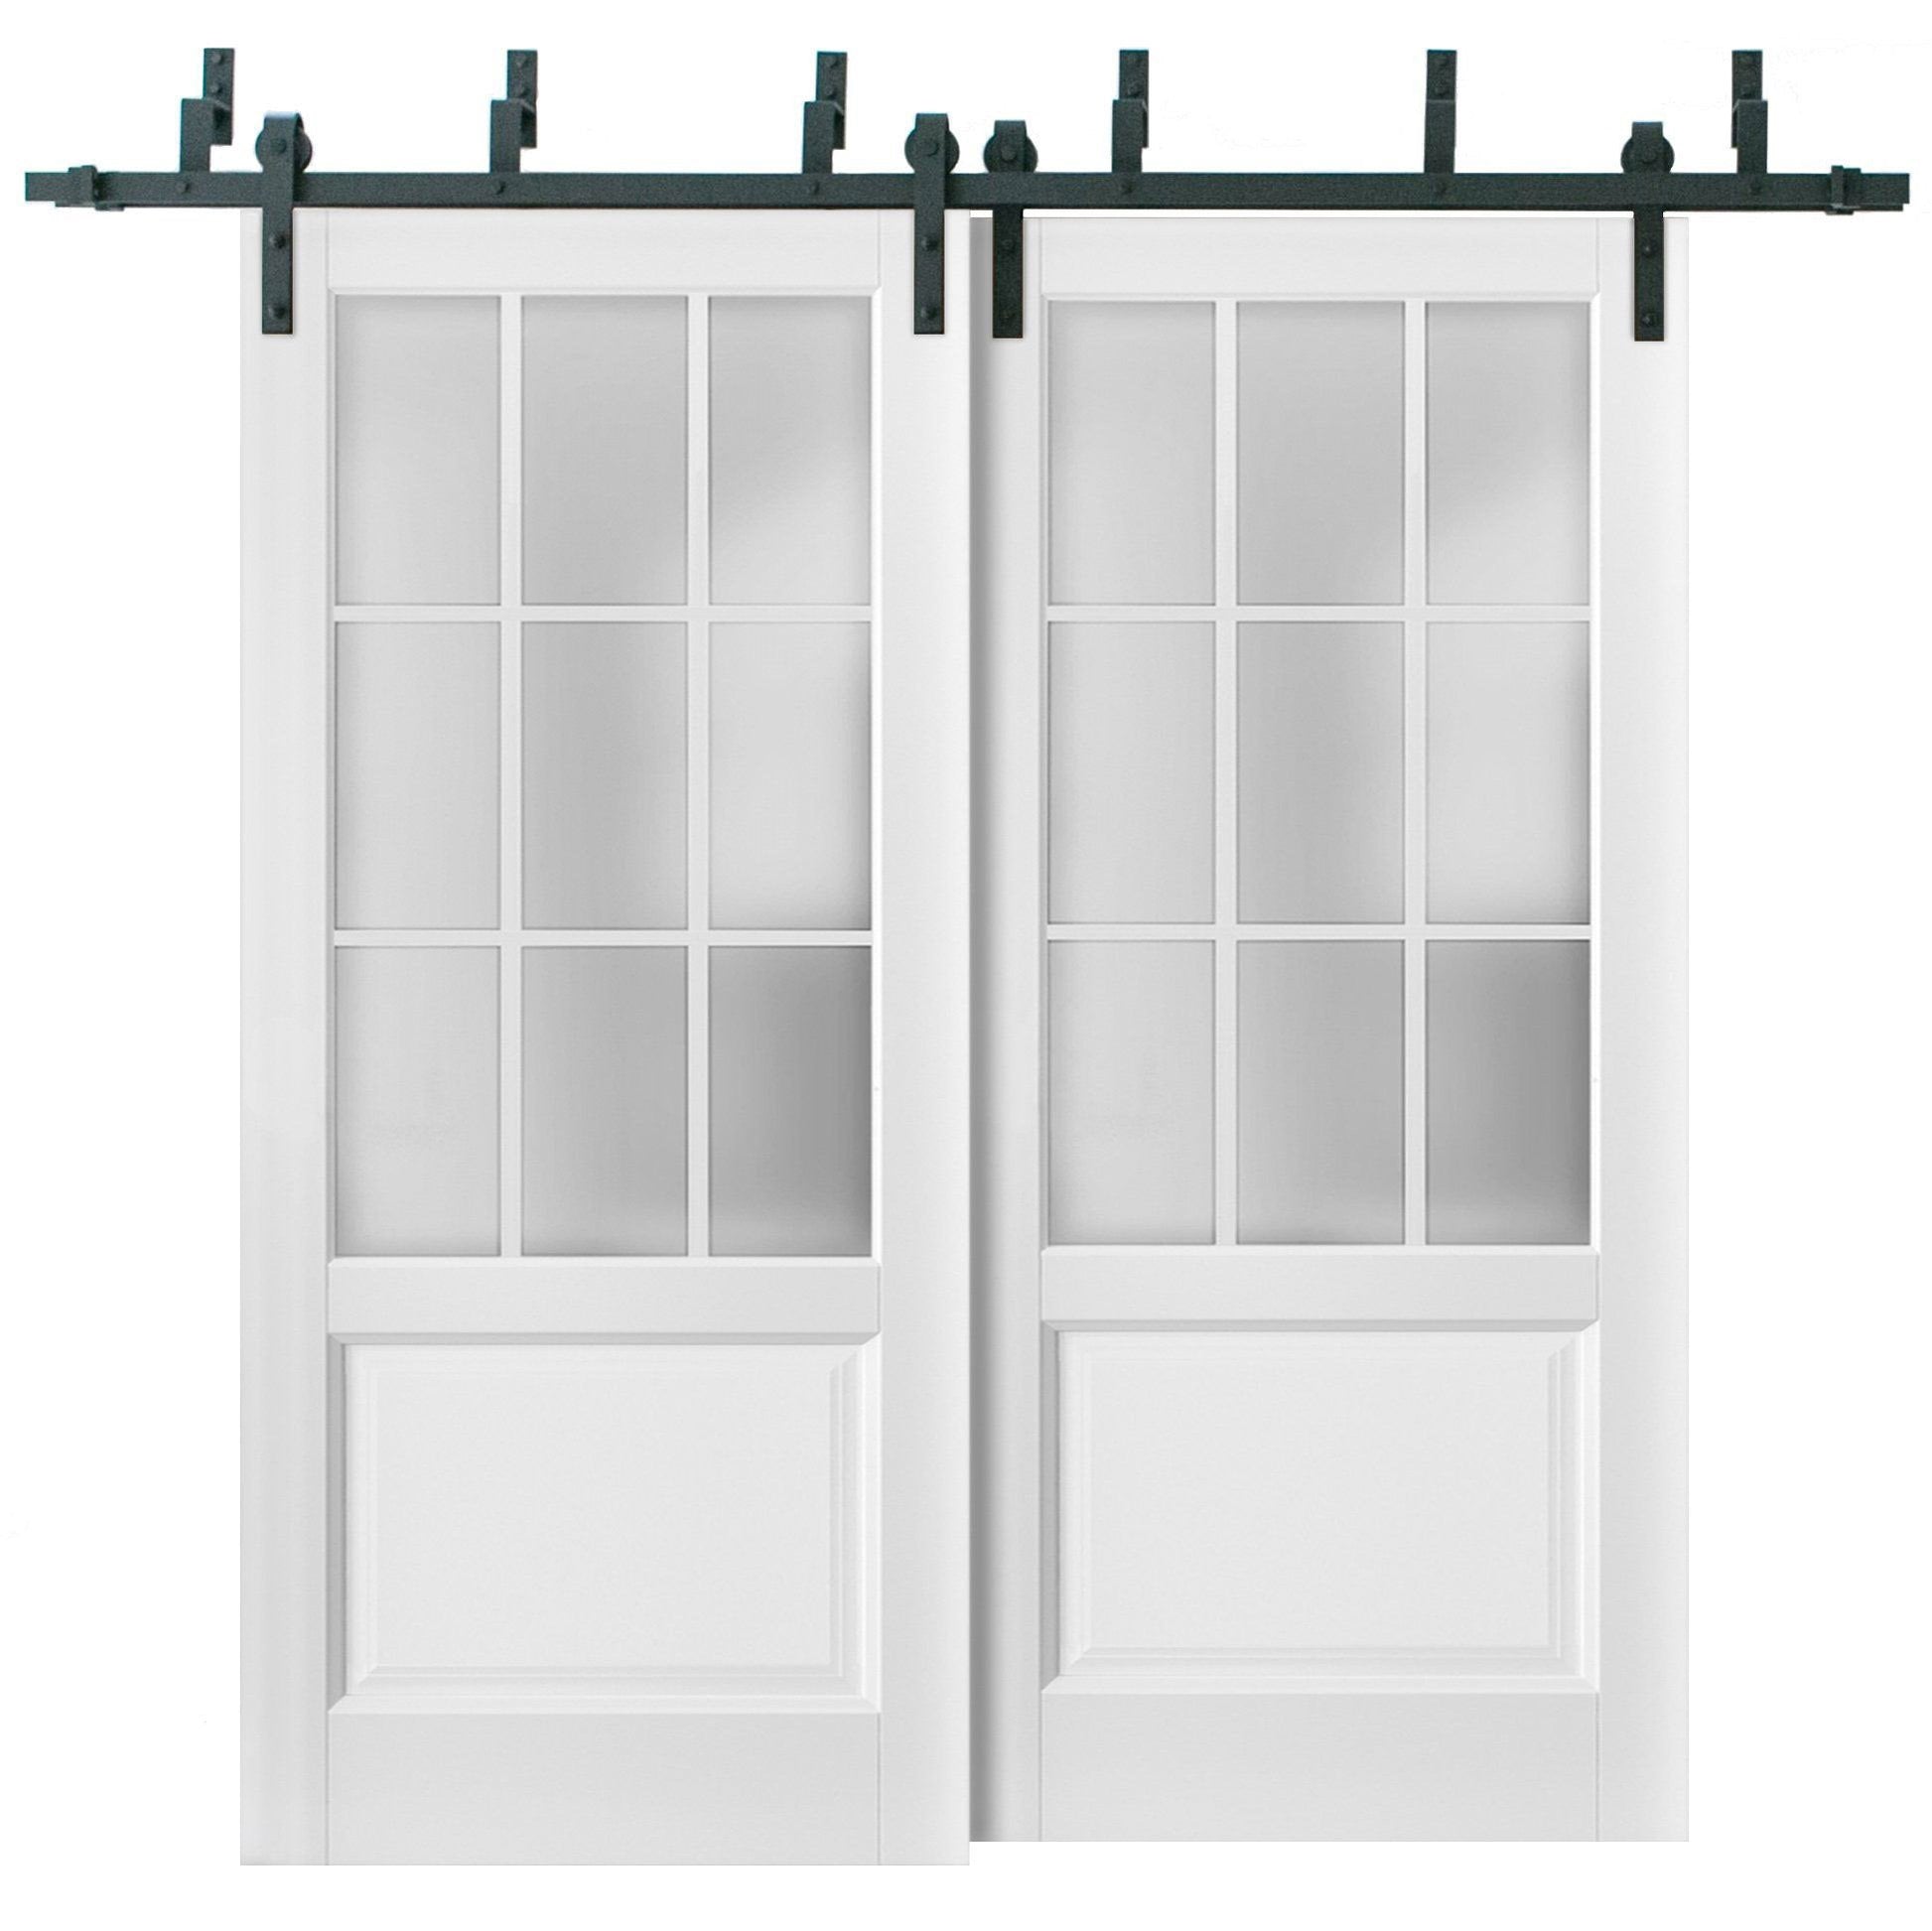 Felicia 3309 Matte White Double Barn Door with 9 Lites Frosted Glass | Black Bypass Rails